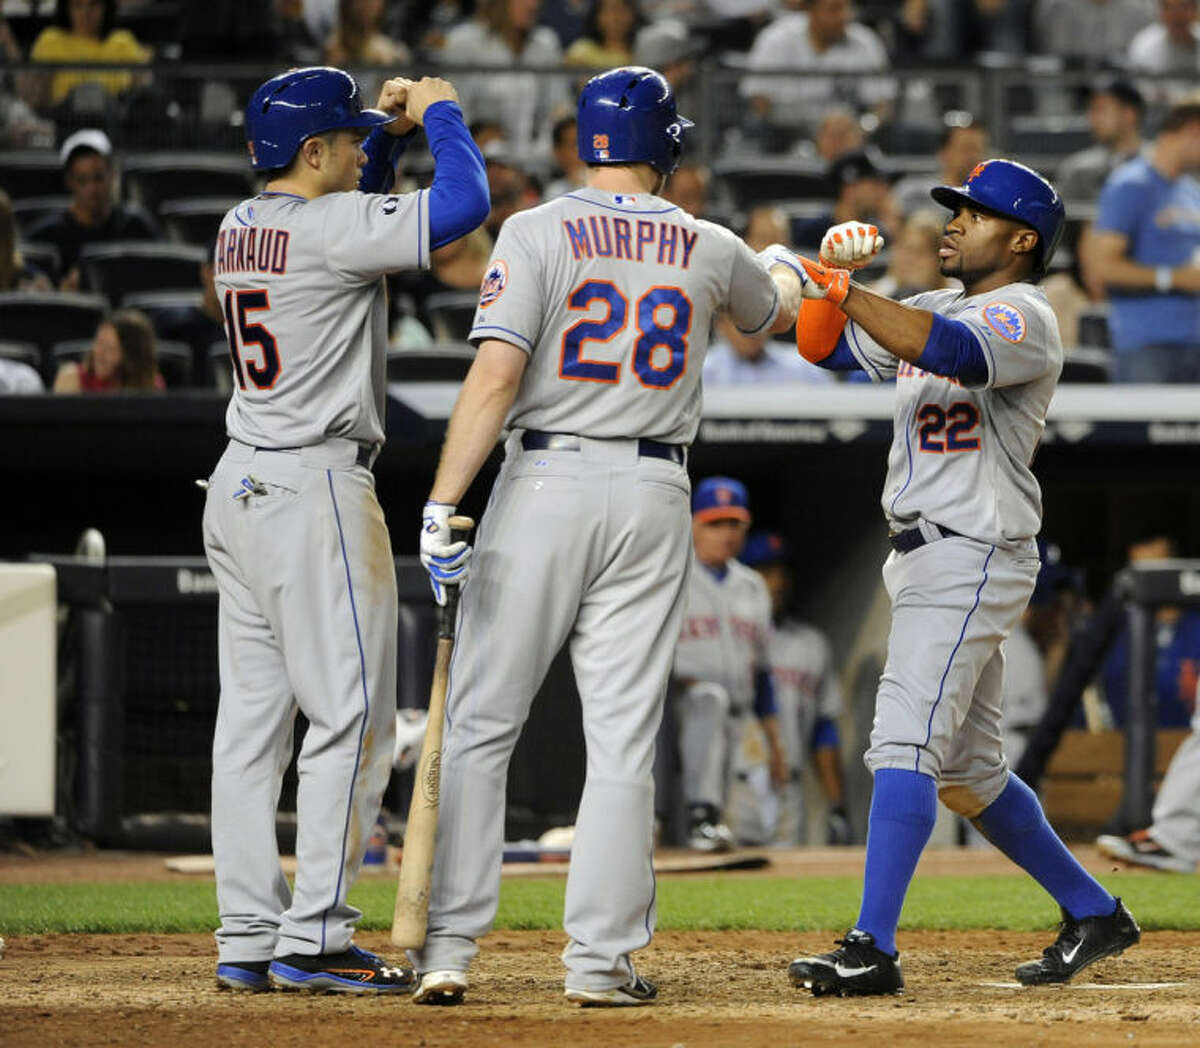 Mets hit 4 HRs, rally twice to beat Yankees 9-7